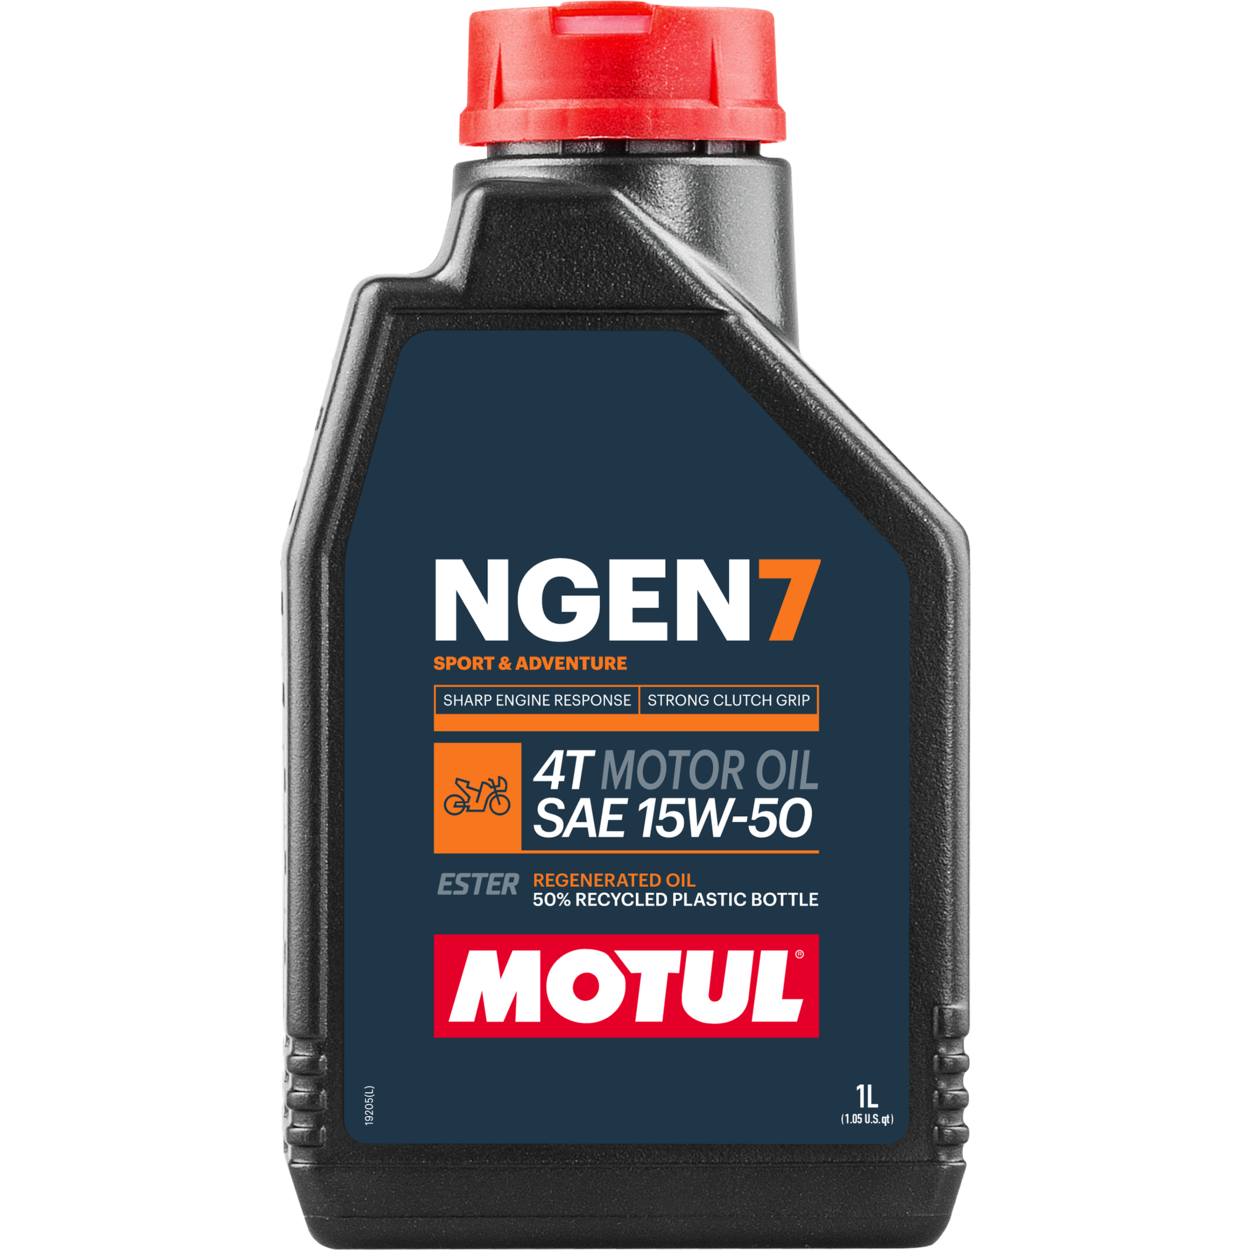 111824-1 MOTUL NGEN 7 15W-50 4T is a best-in-class 4-stroke motor oil based on a combination of finest virgin base oils and additives blended with synthetic esters and high quality regenerated oils.